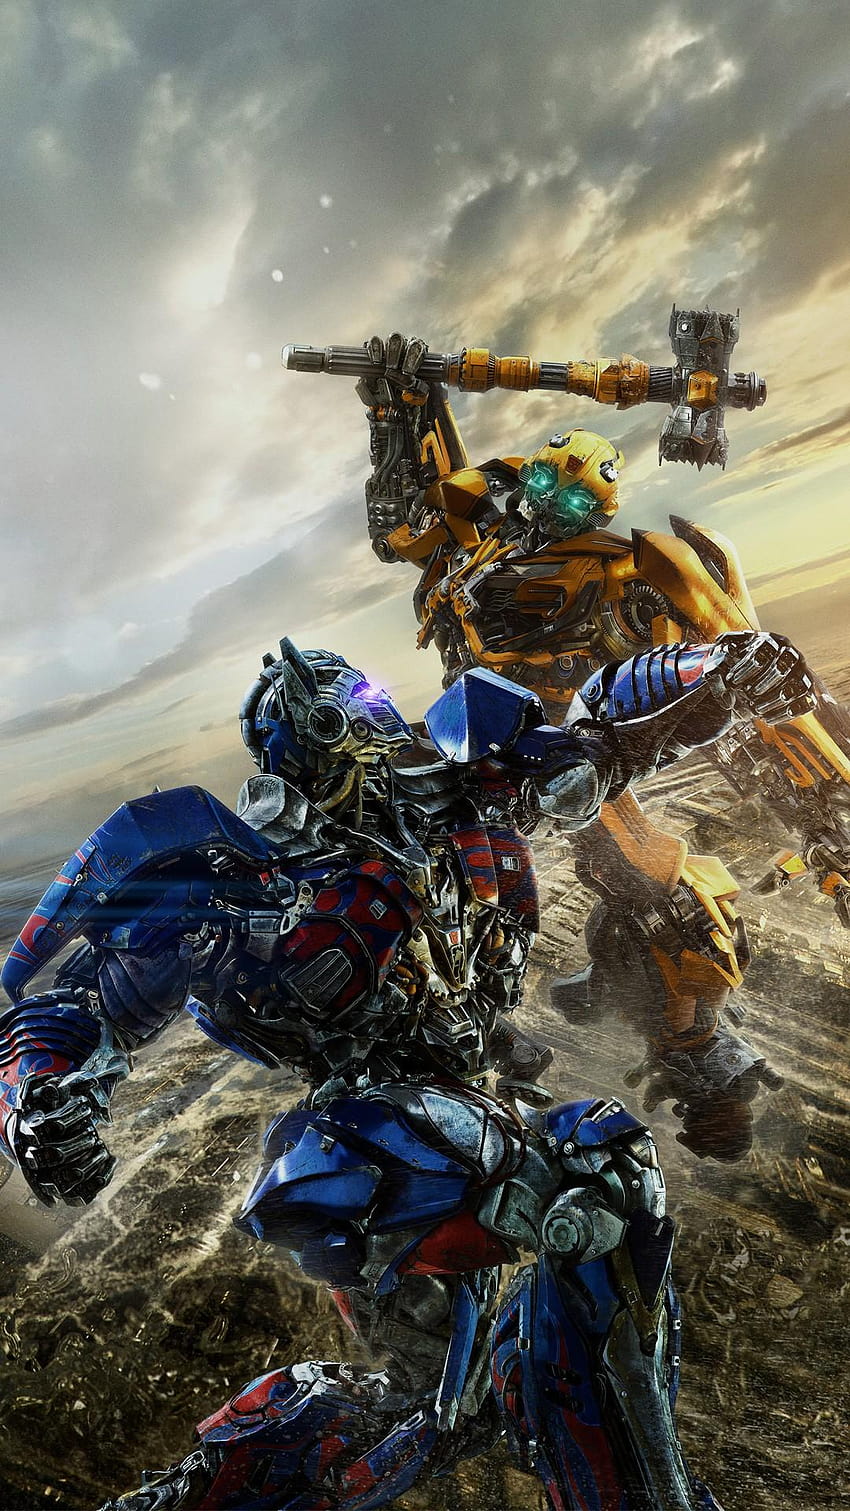 Bumblebee vs Optimus Prime Transformers The Last Knight, bumblebee android mobile HD phone wallpaper